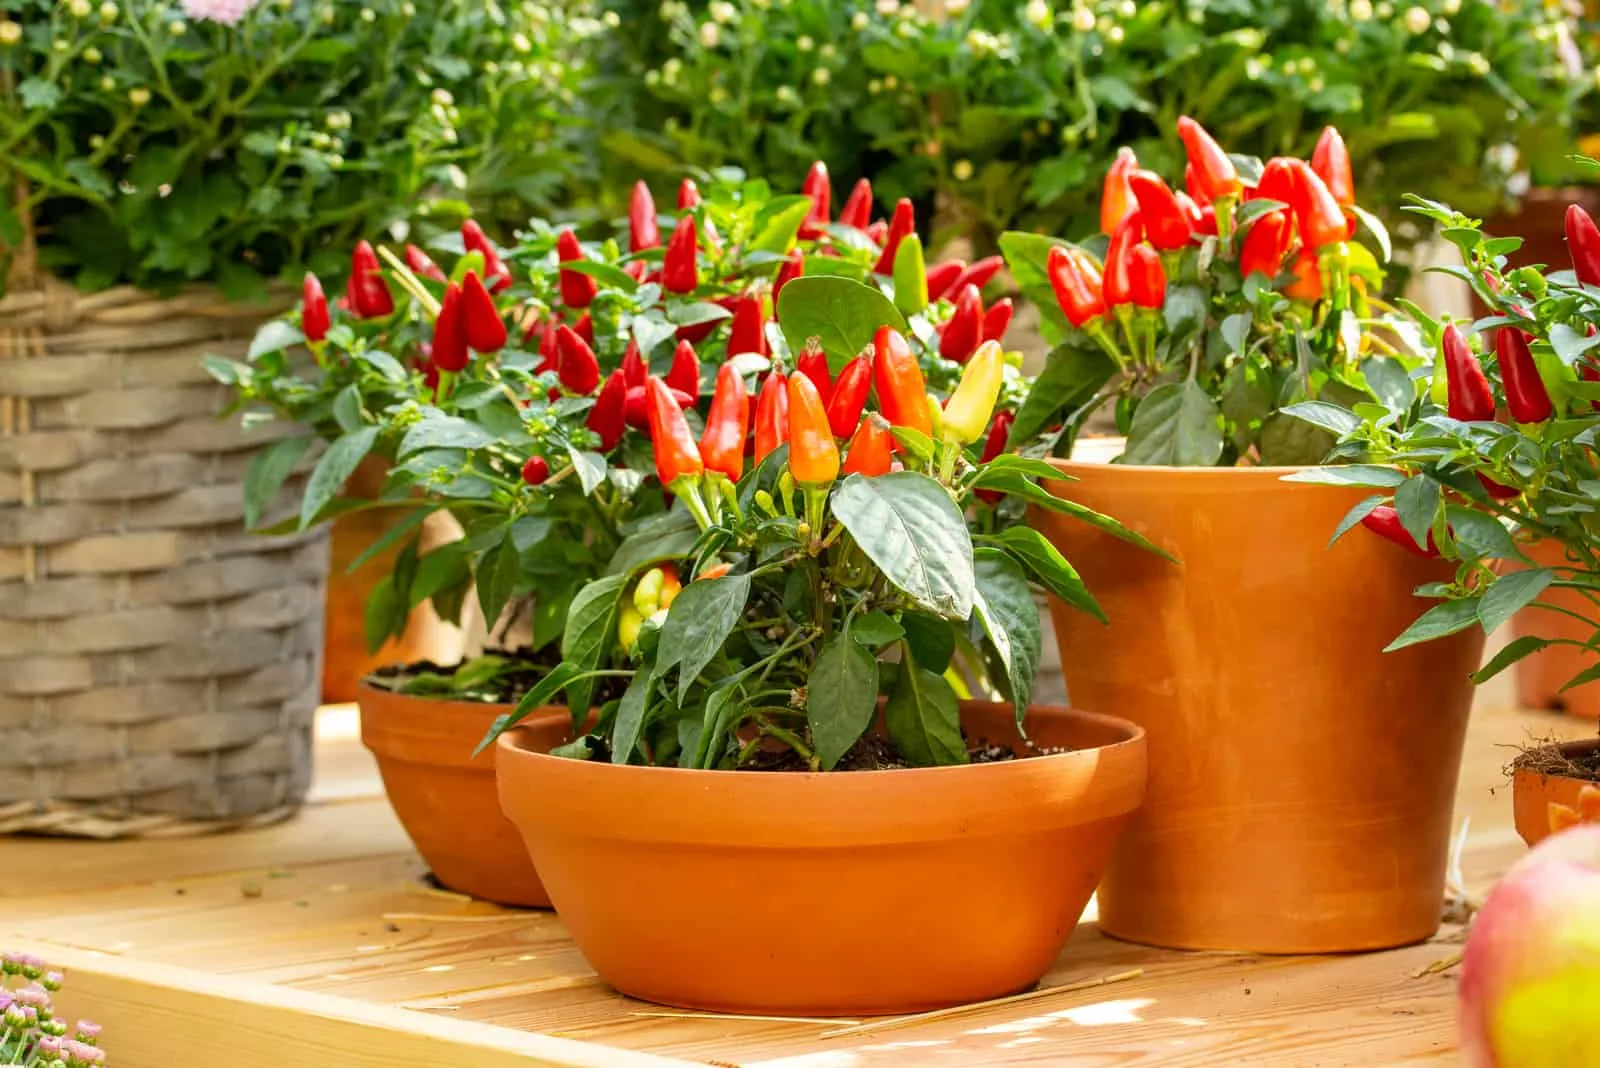 Small red jalapeno peppers grow in clay pots